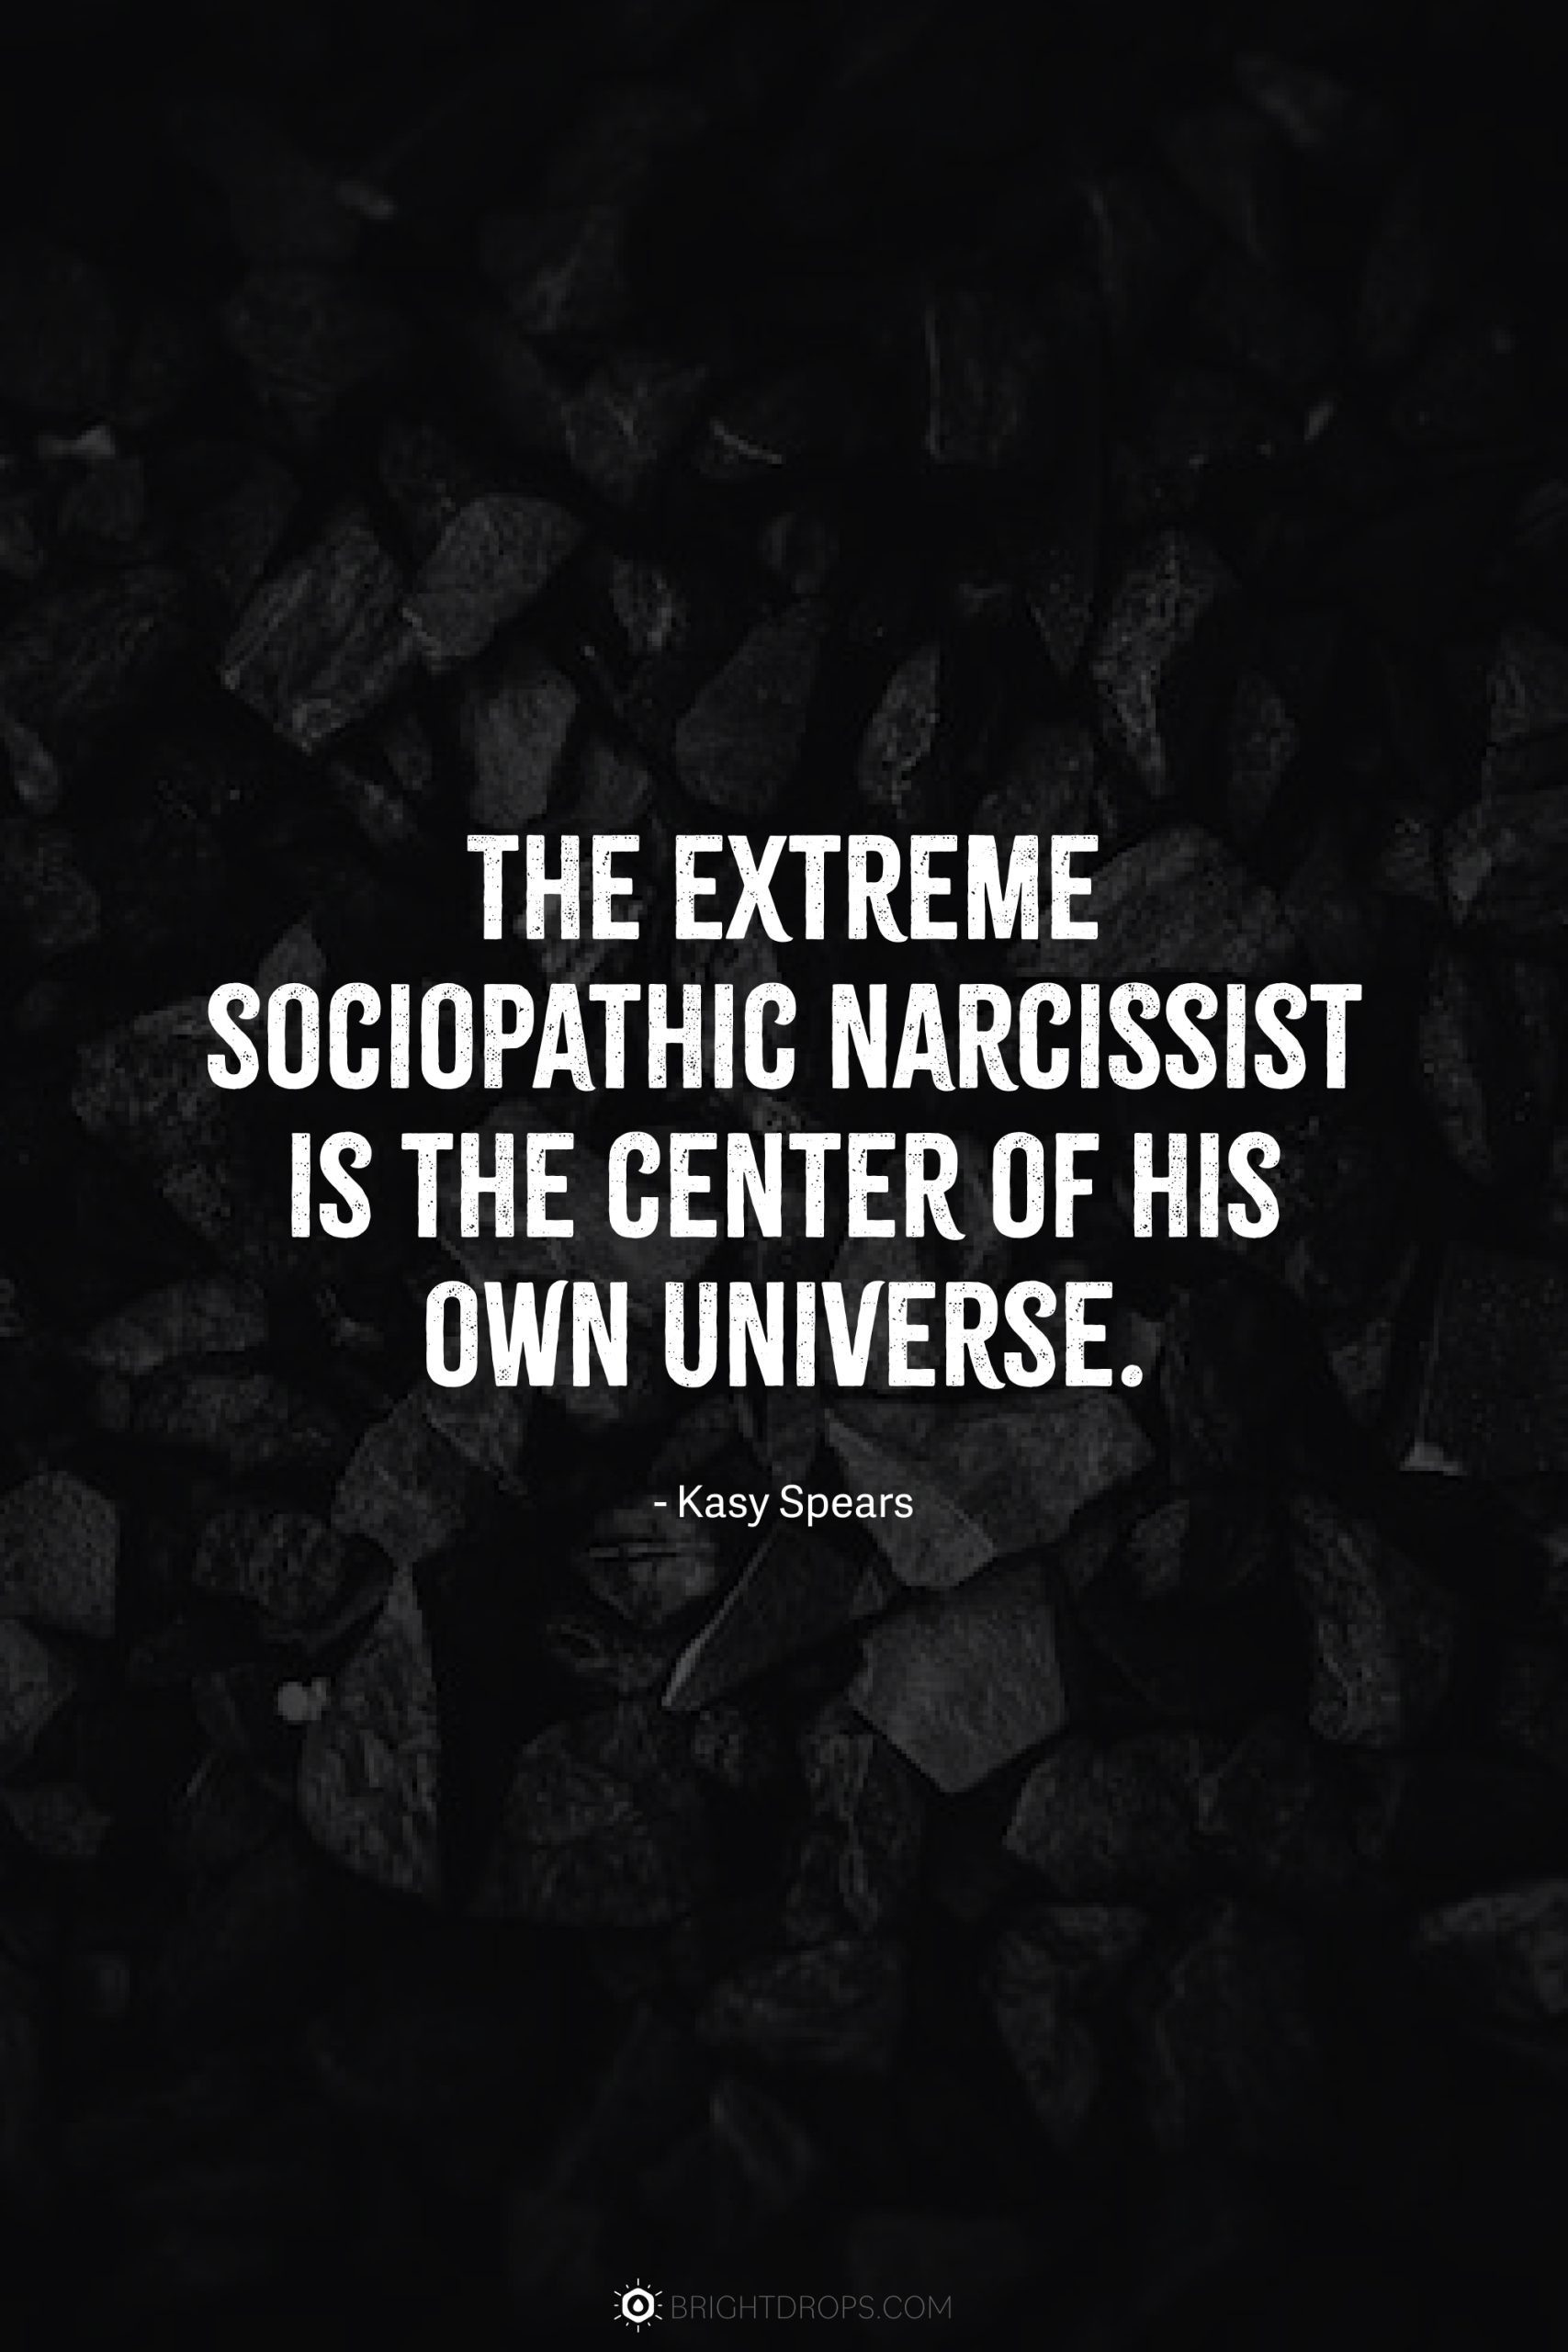 The extreme sociopathic narcissist is the center of his own universe.